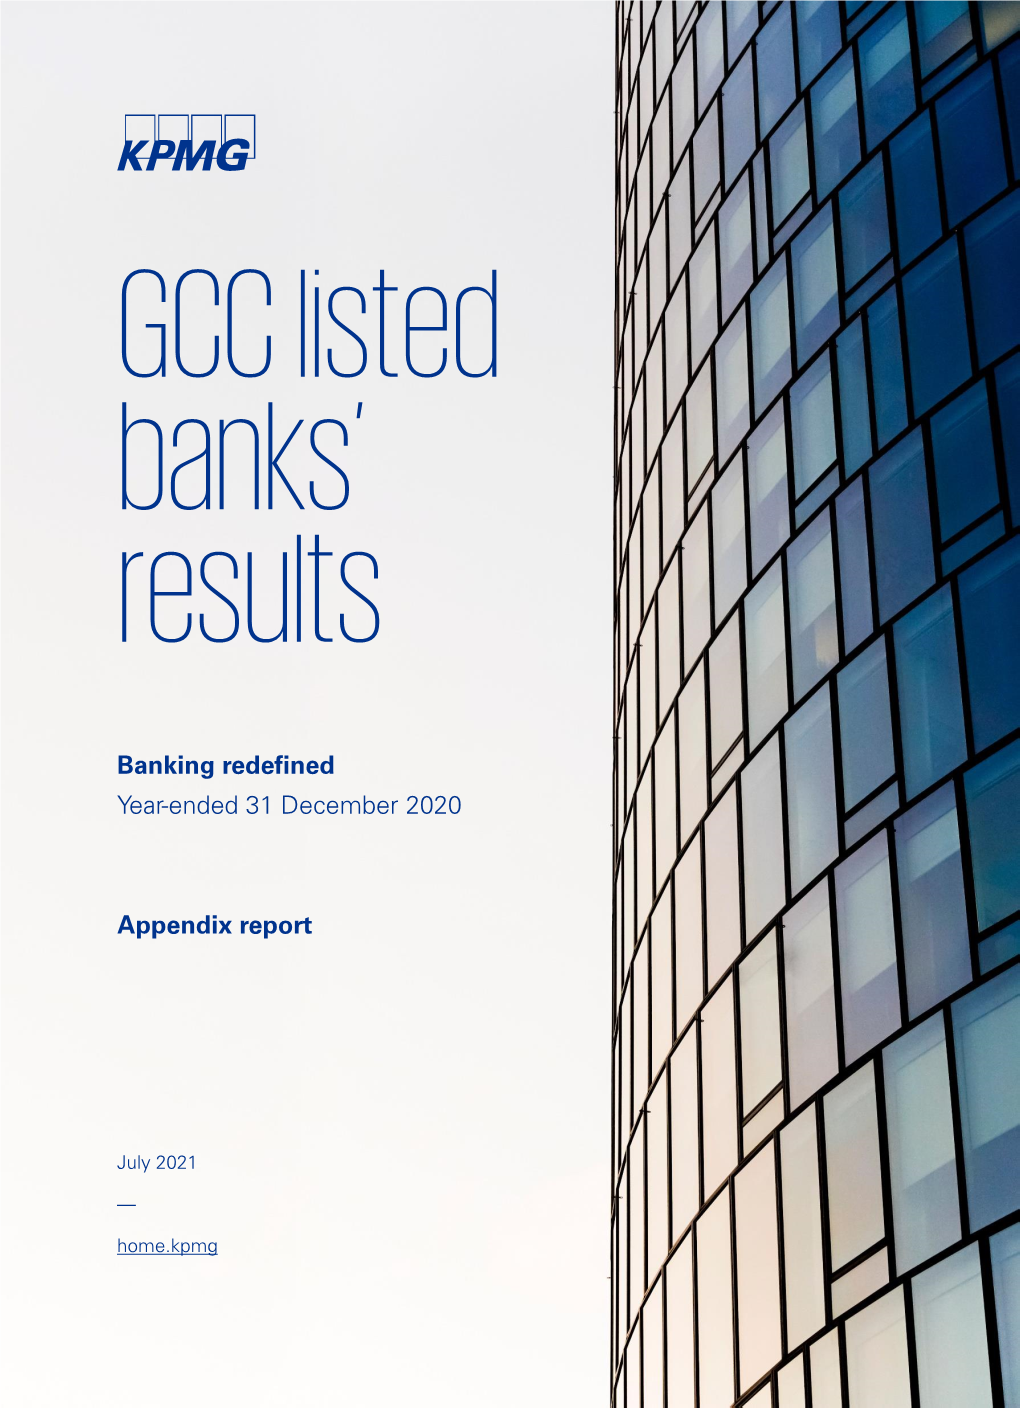 GCC Listed Banks' Results Report for the Year-Ended 31 December 2020